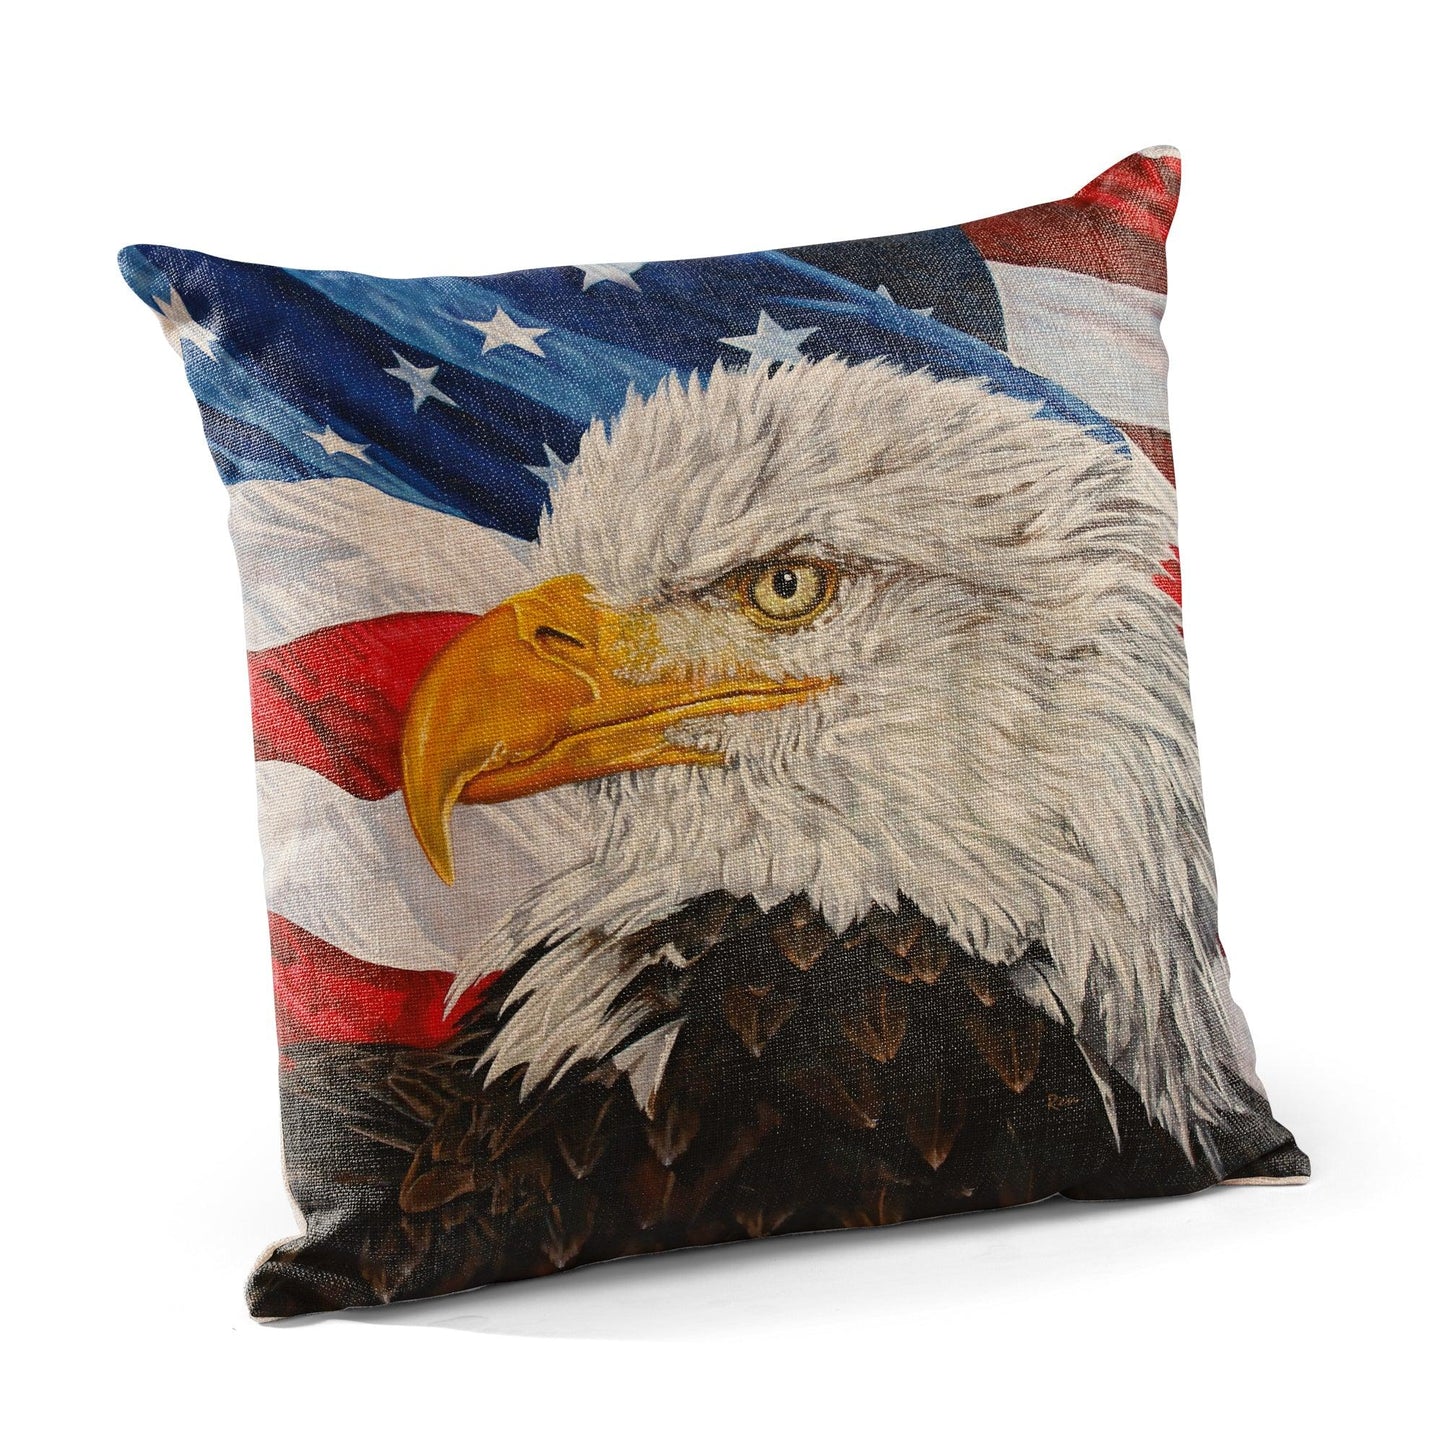 Freedom - Bald Eagle 18" Decorative Pillow - Wild Wings